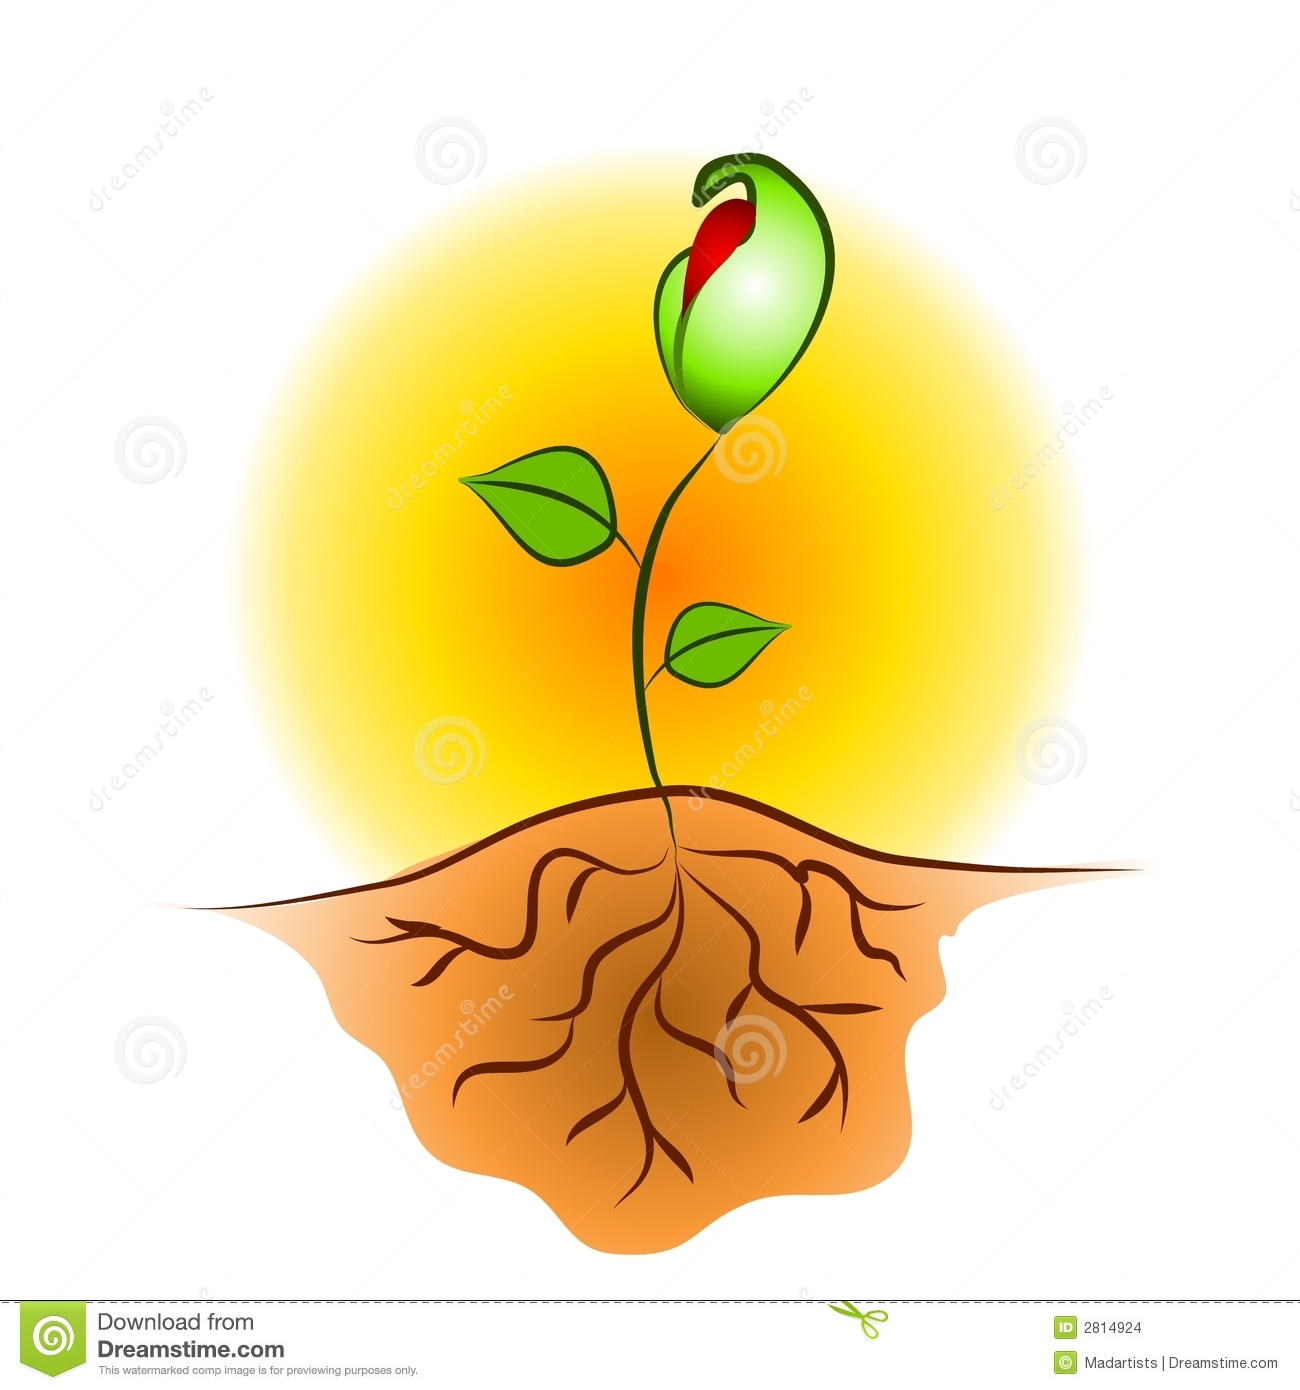 Clip Art Illustration Of A Young Seedling Plant Growing Against A